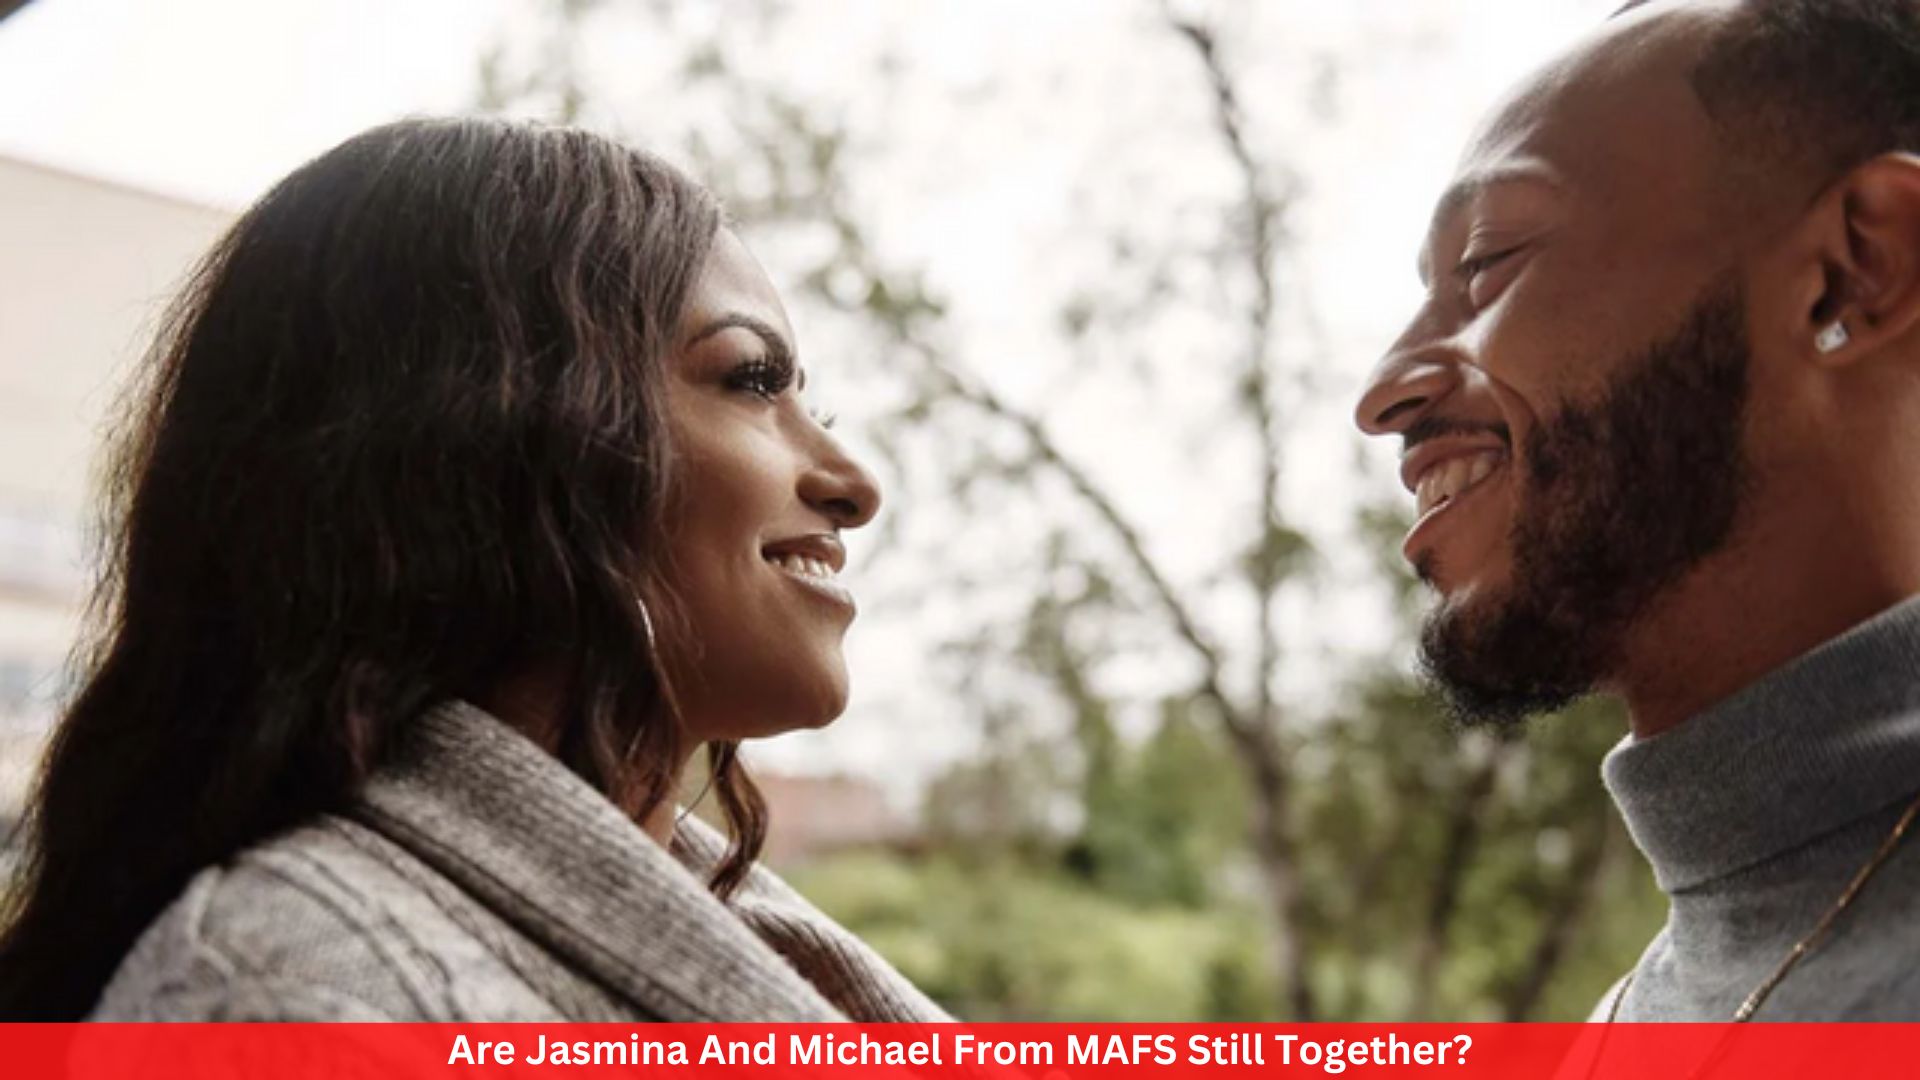 Are Jasmina And Michael From MAFS Still Together?